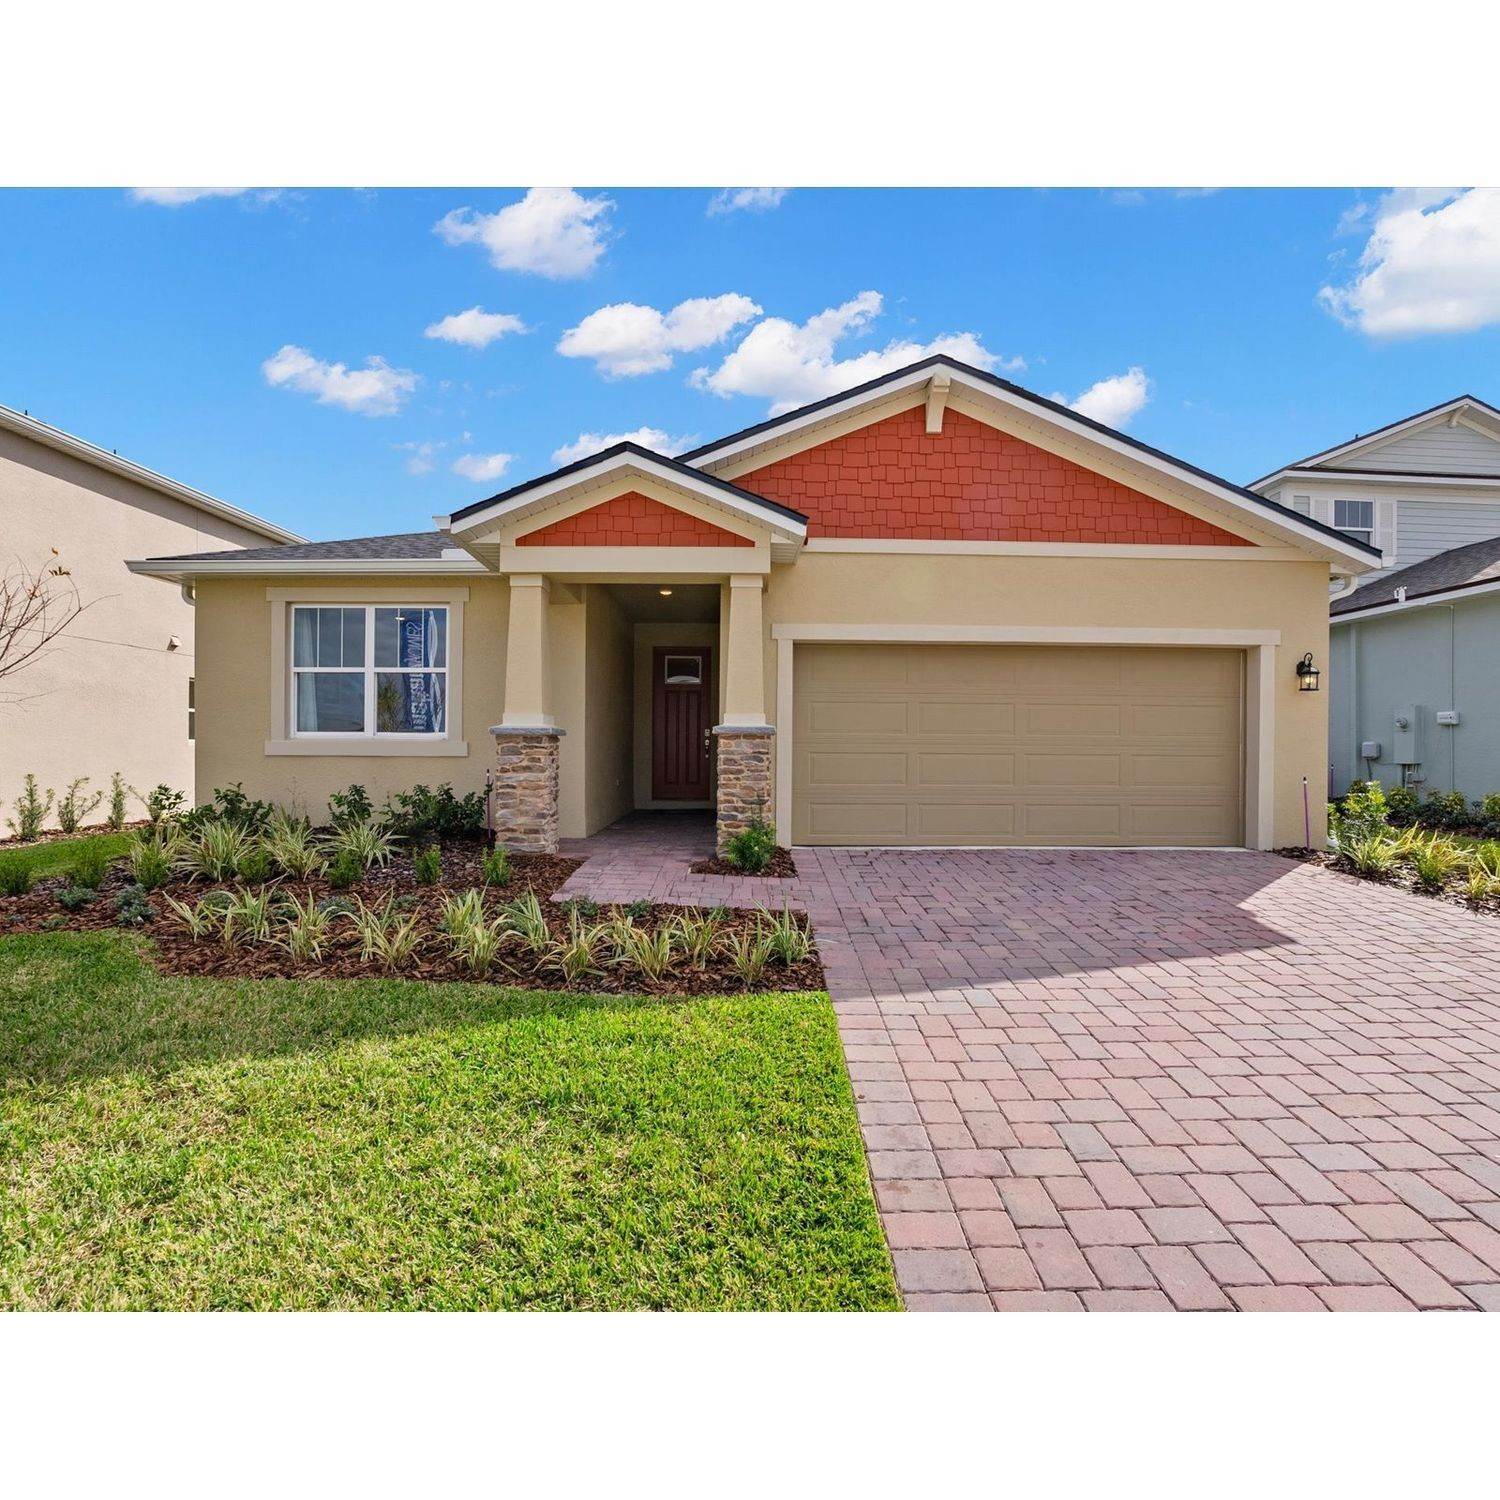 13. Waterbrooke bâtiment à 3029 Ambersweet Place, Clermont, FL 34711